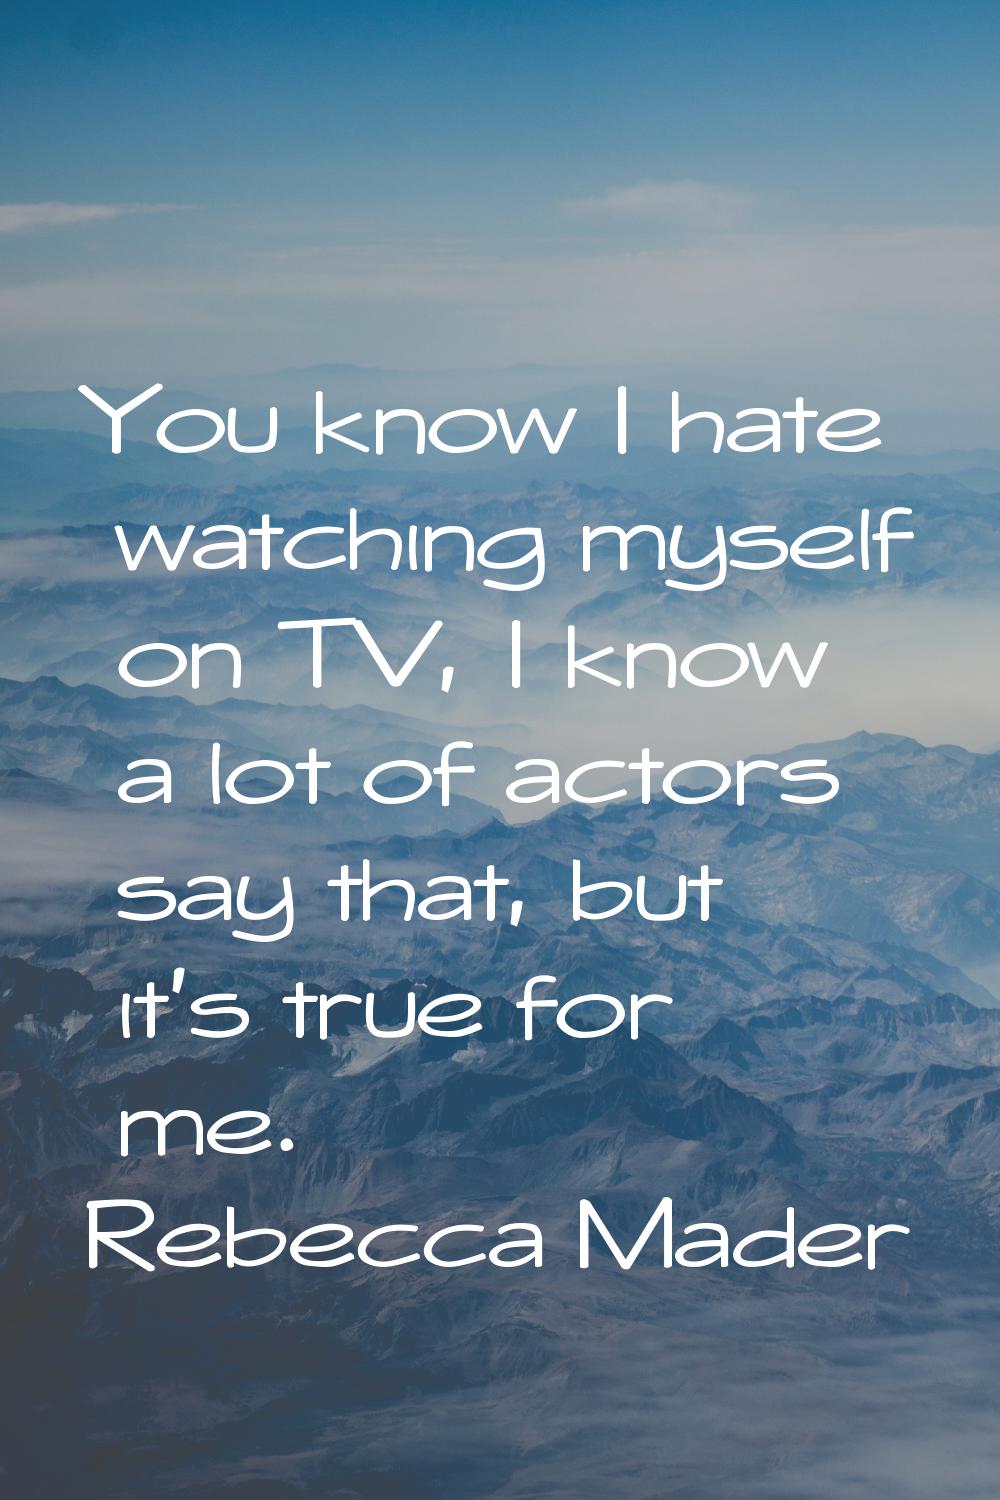 You know I hate watching myself on TV, I know a lot of actors say that, but it's true for me.